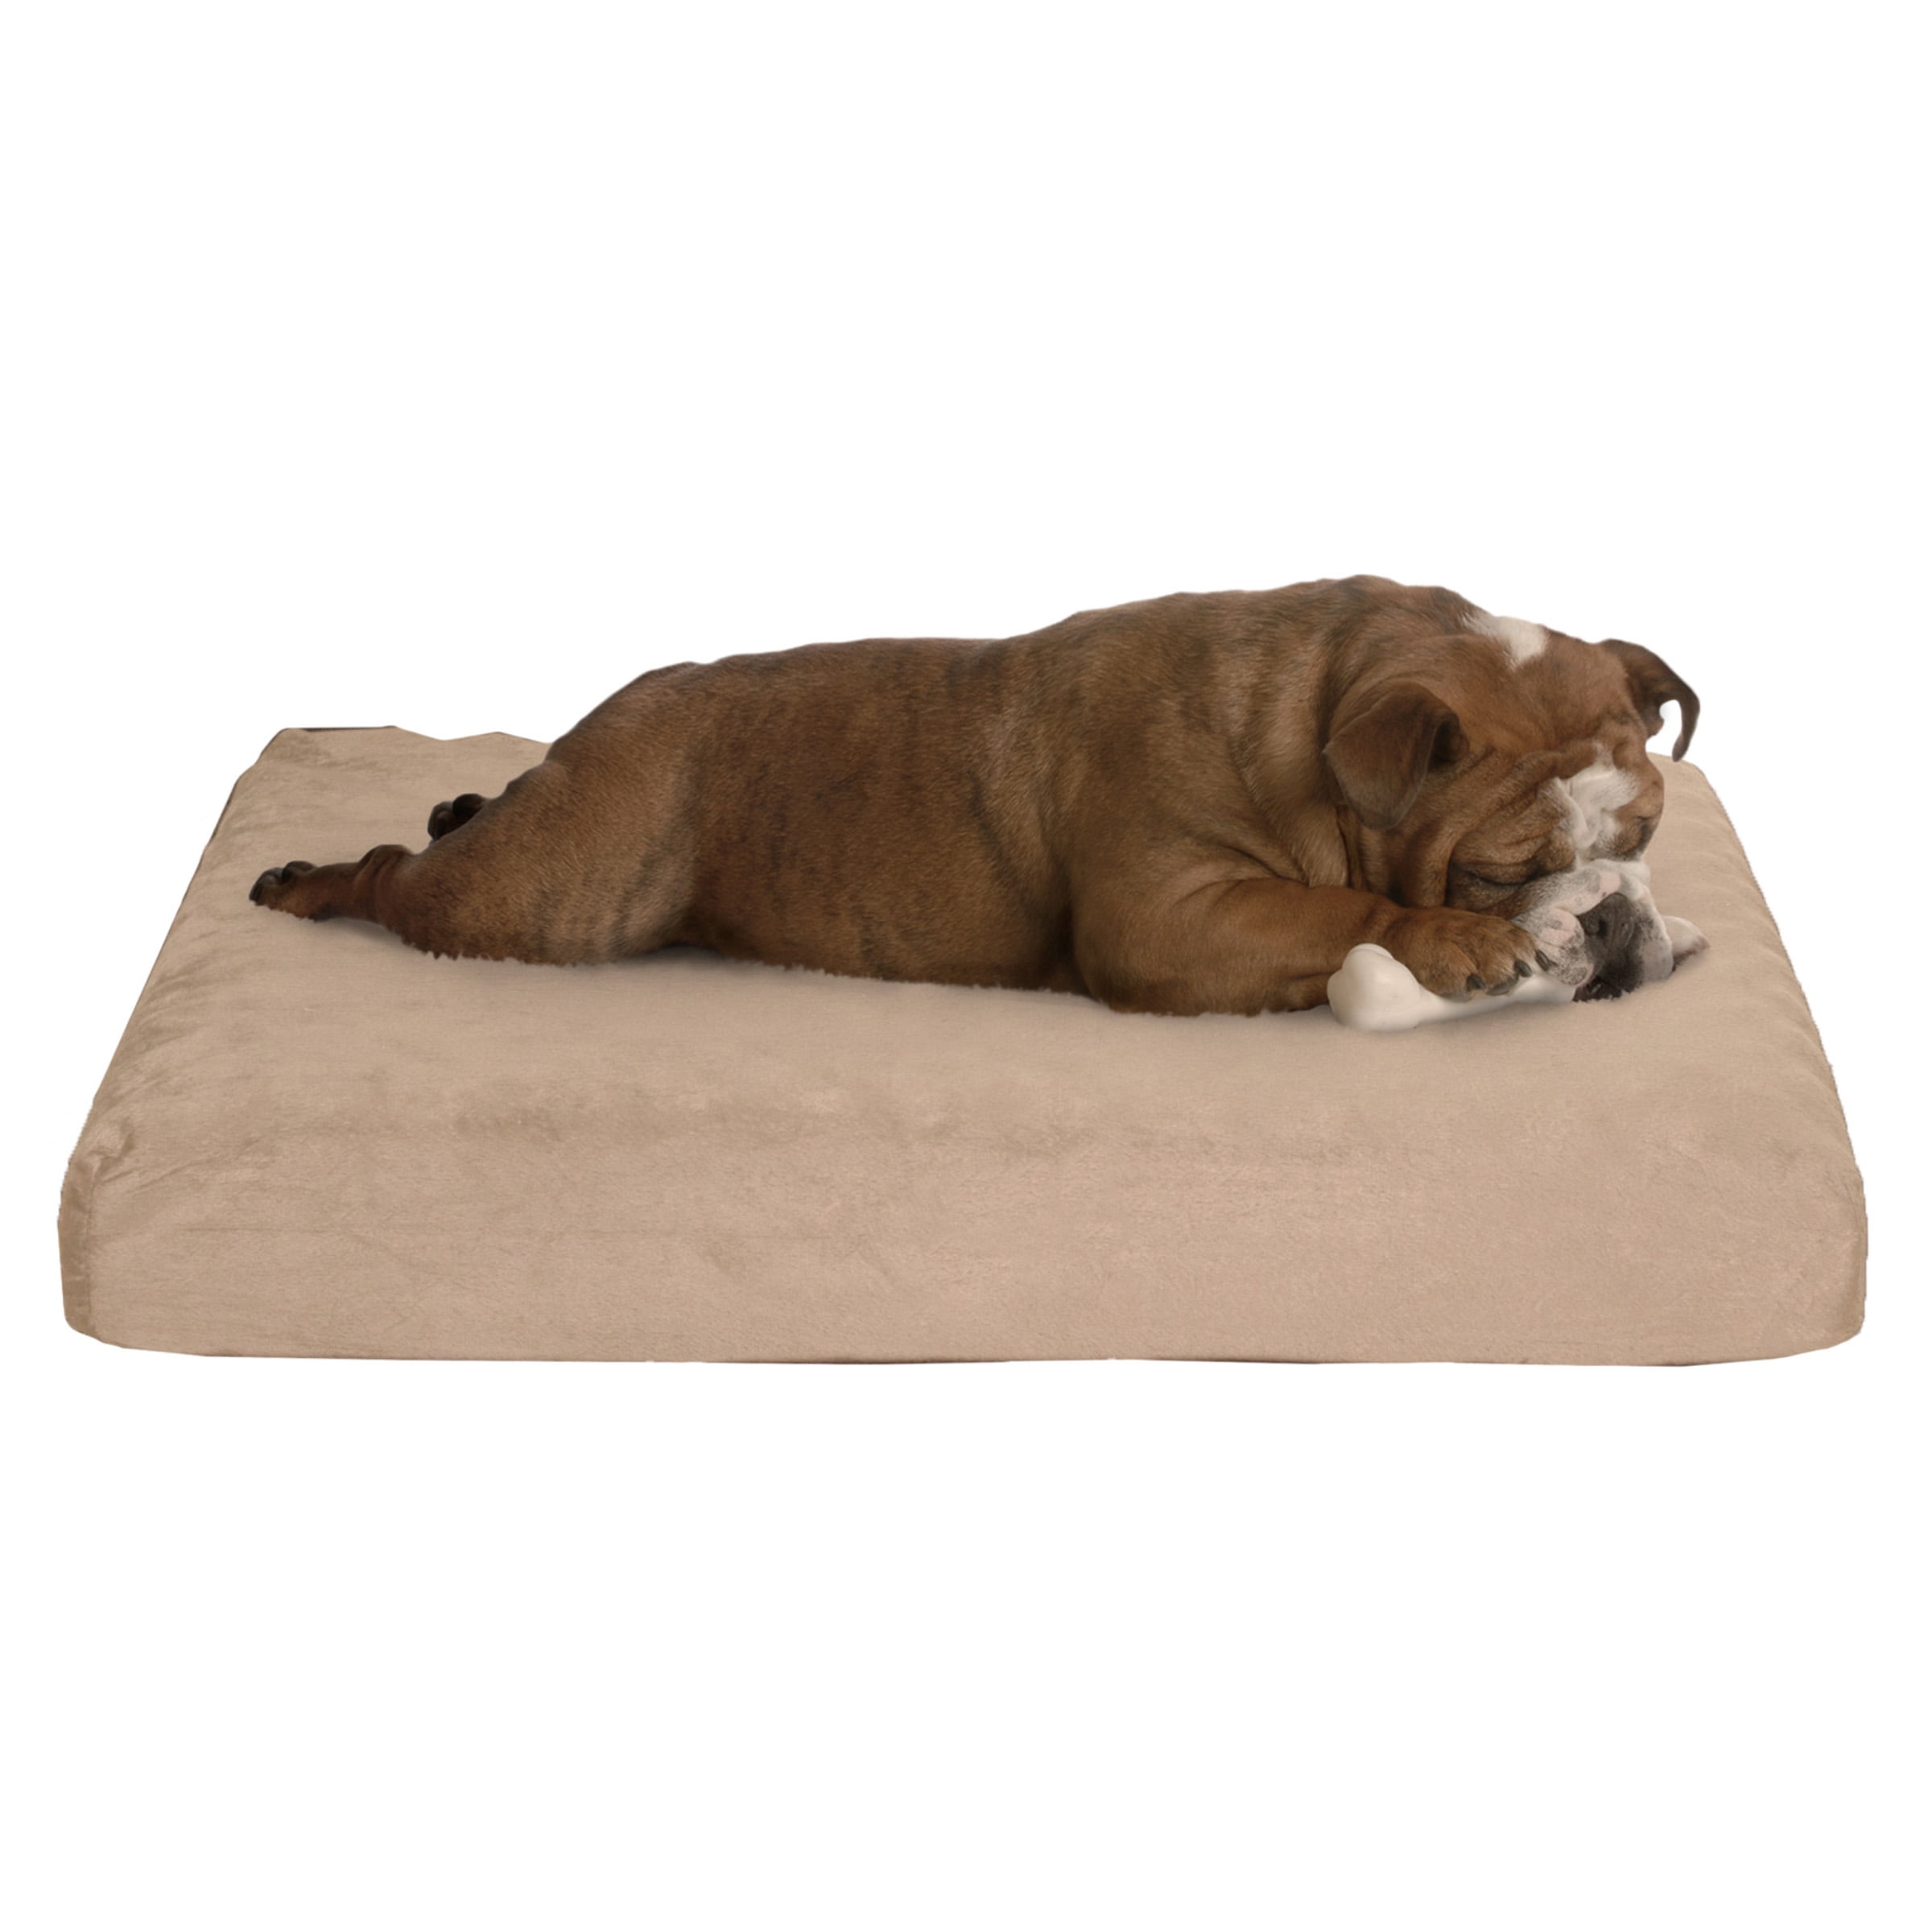 Heavy duty Waterproof Orthopedic MEMORY FOAM Dog Bed w/ removable Canvas cover 